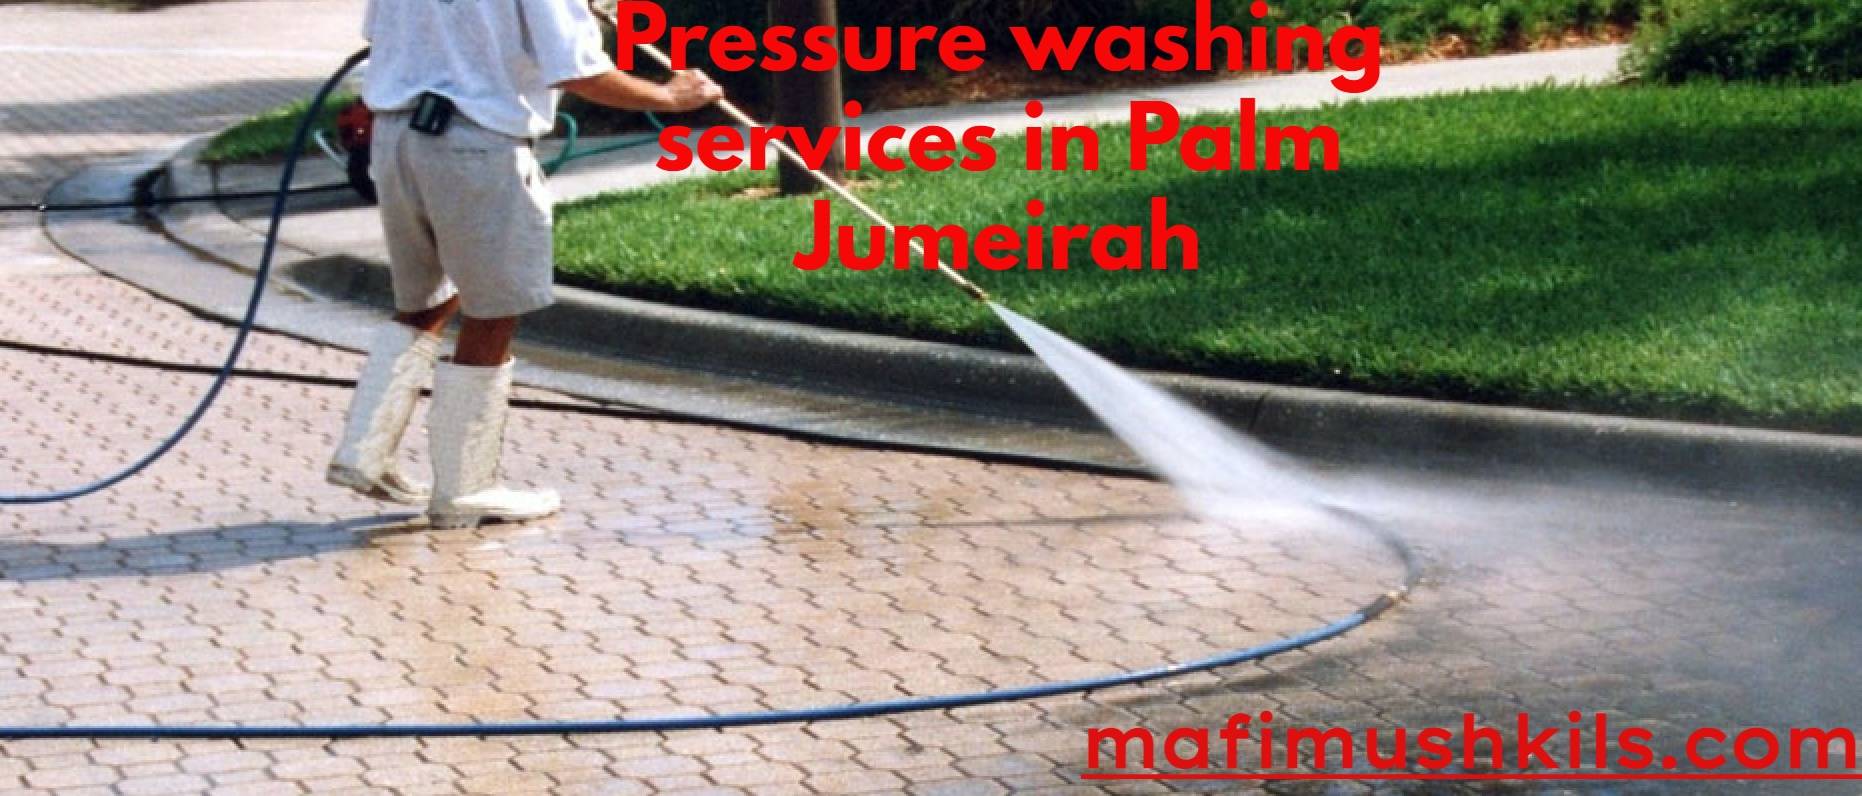 Pressure washing services in Palm Jumeirah